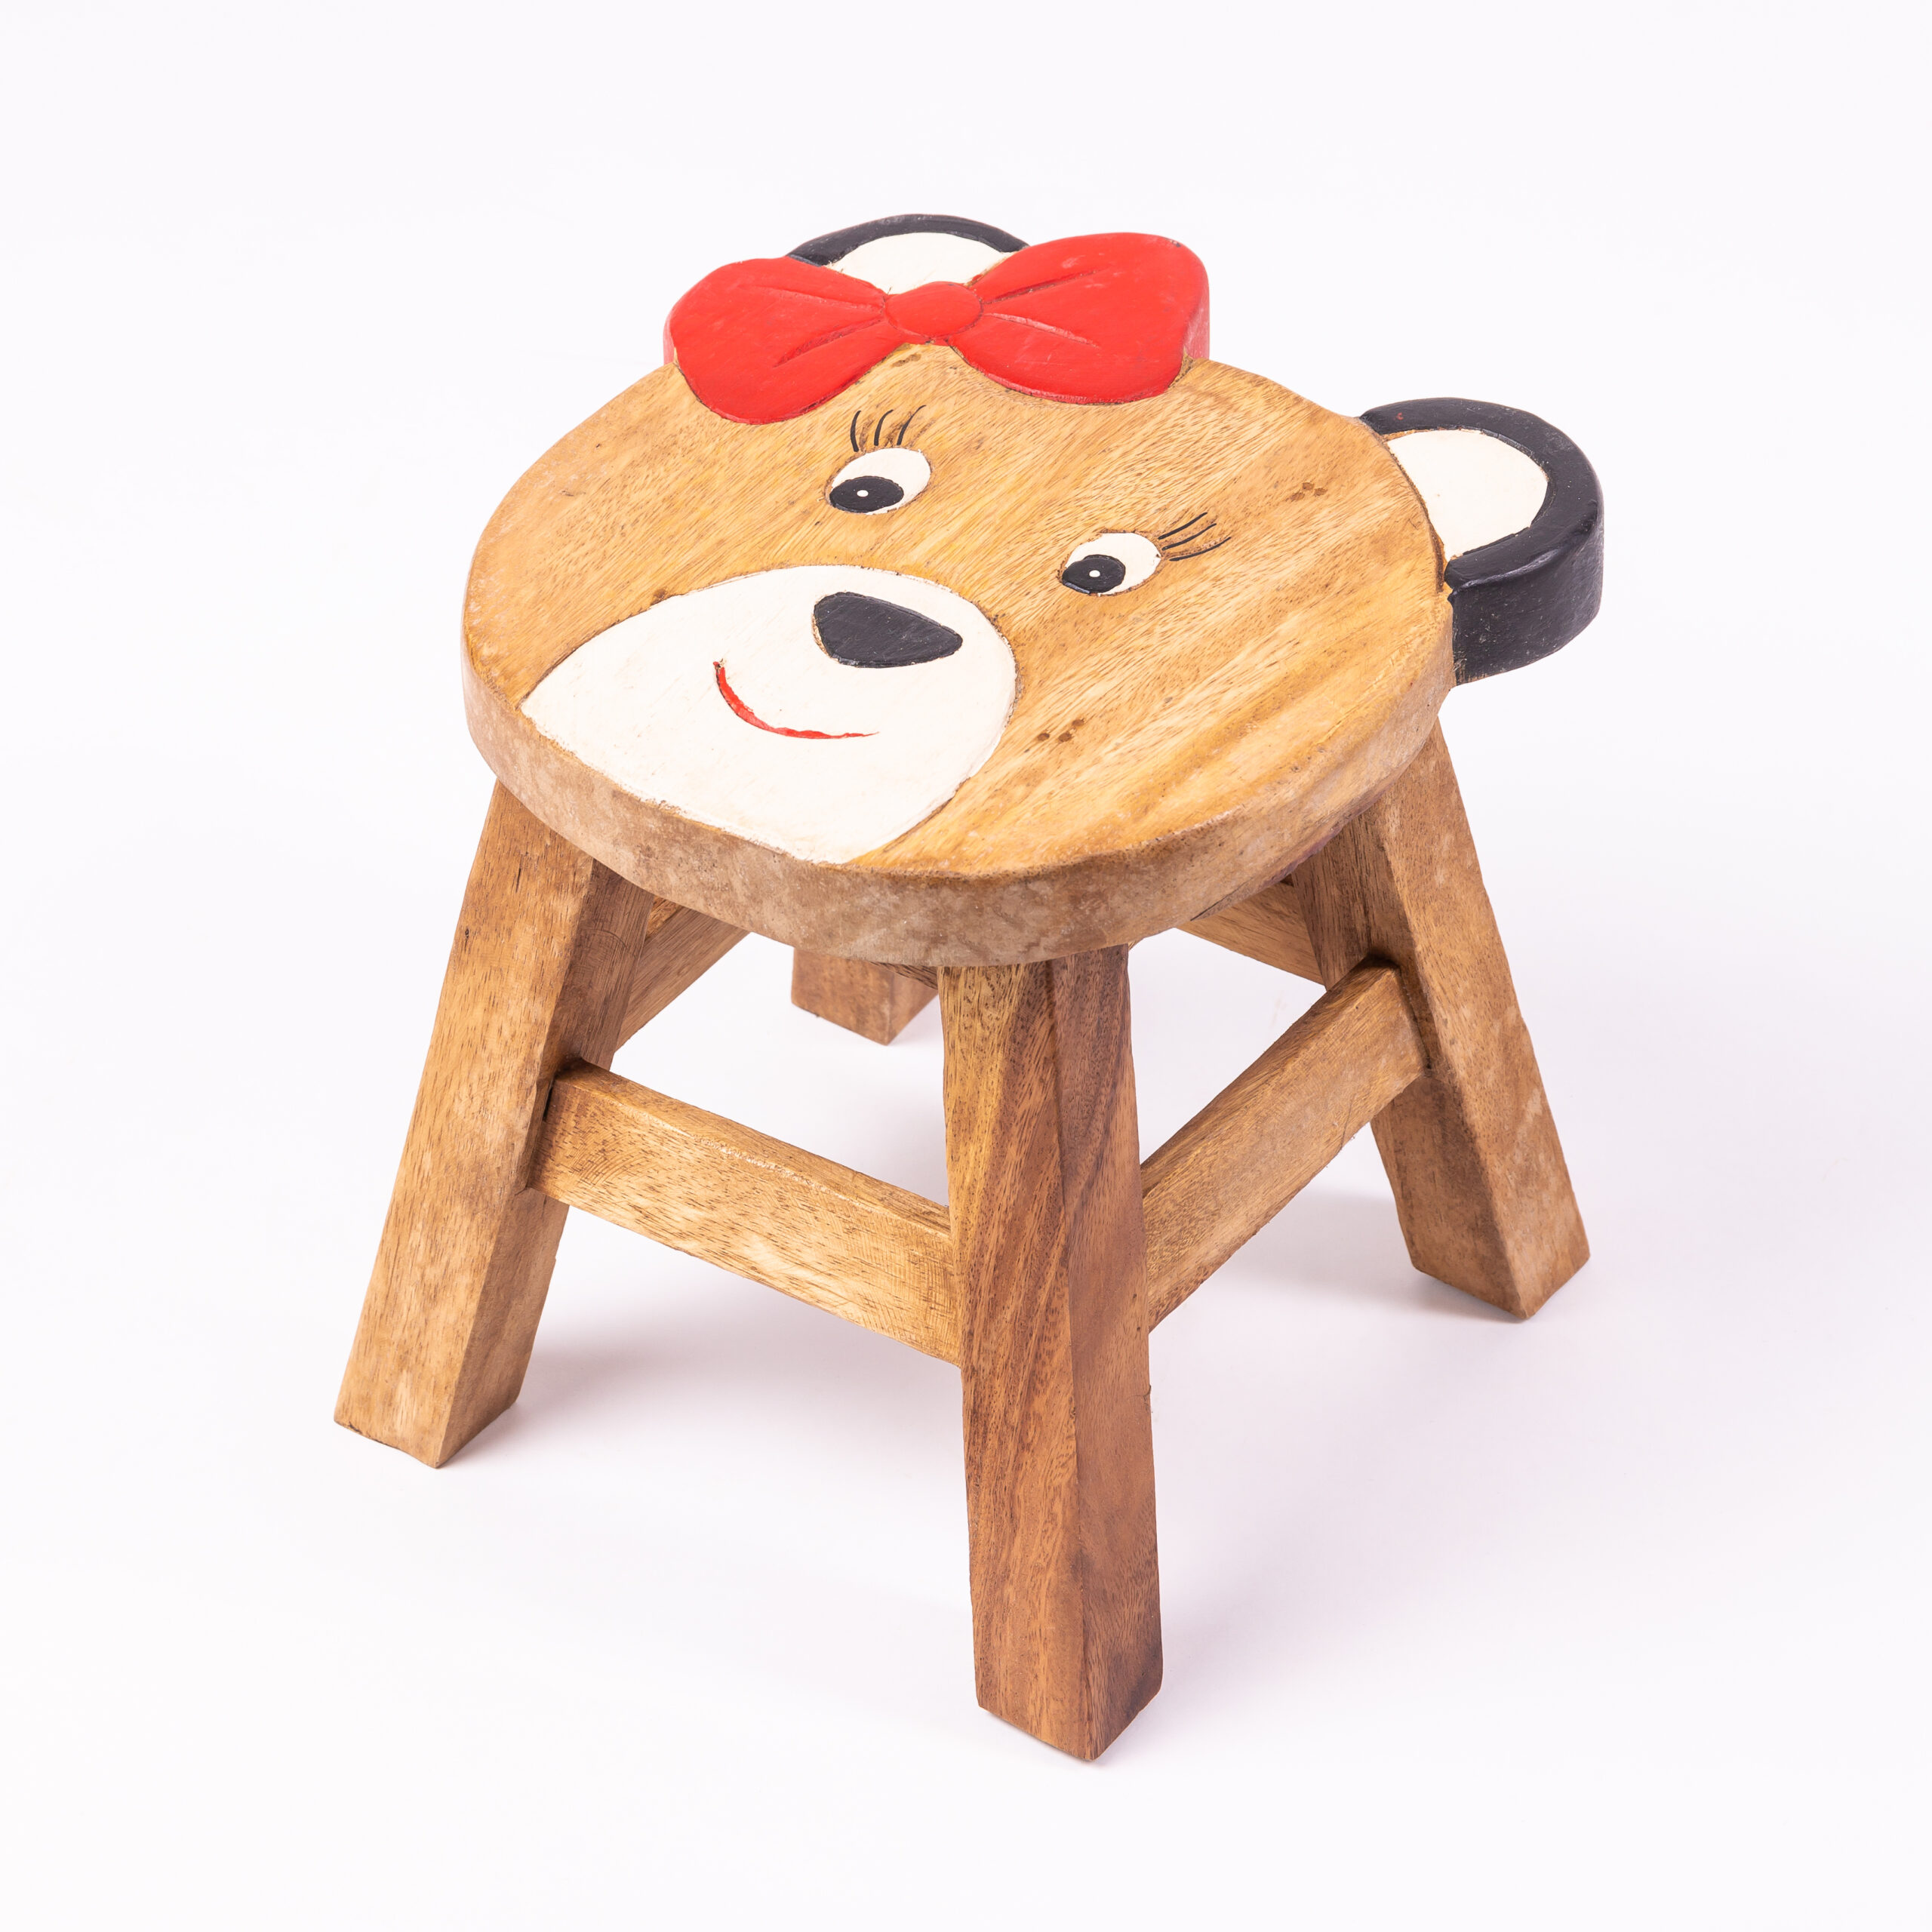 Children's stool, stool, children's chair solid wood with animal motif bear  with bow, 25 cm seat height for our children's seating... - FairEntry Shop